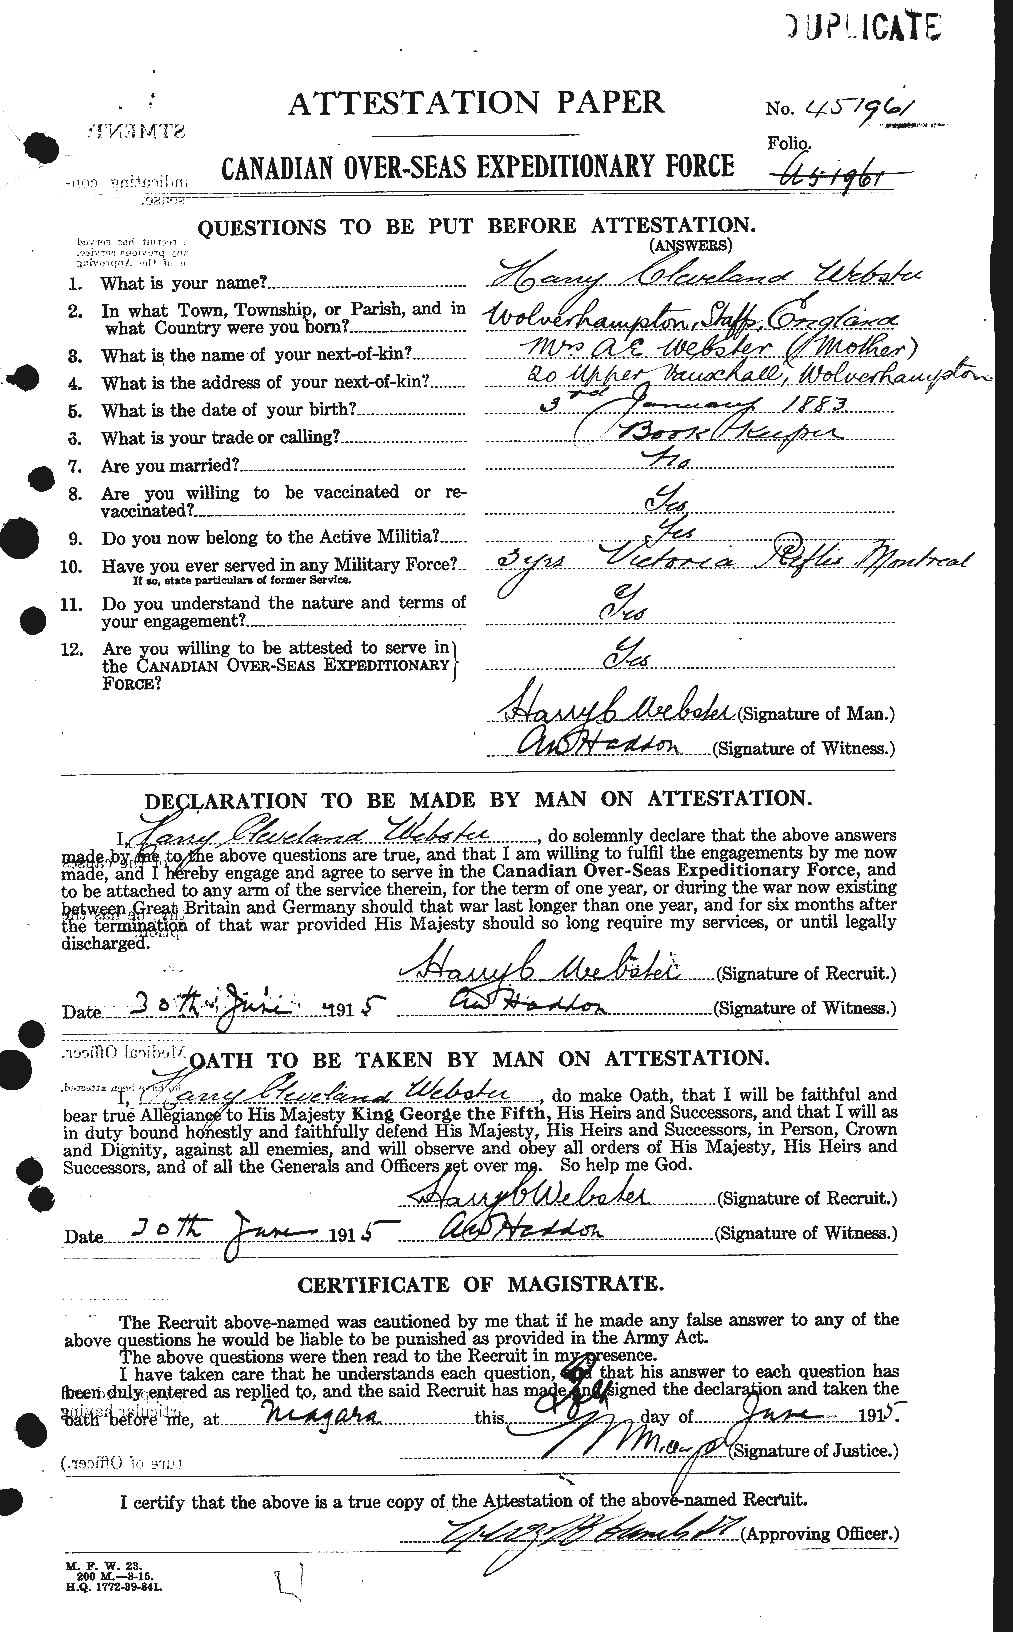 Personnel Records of the First World War - CEF 670417a